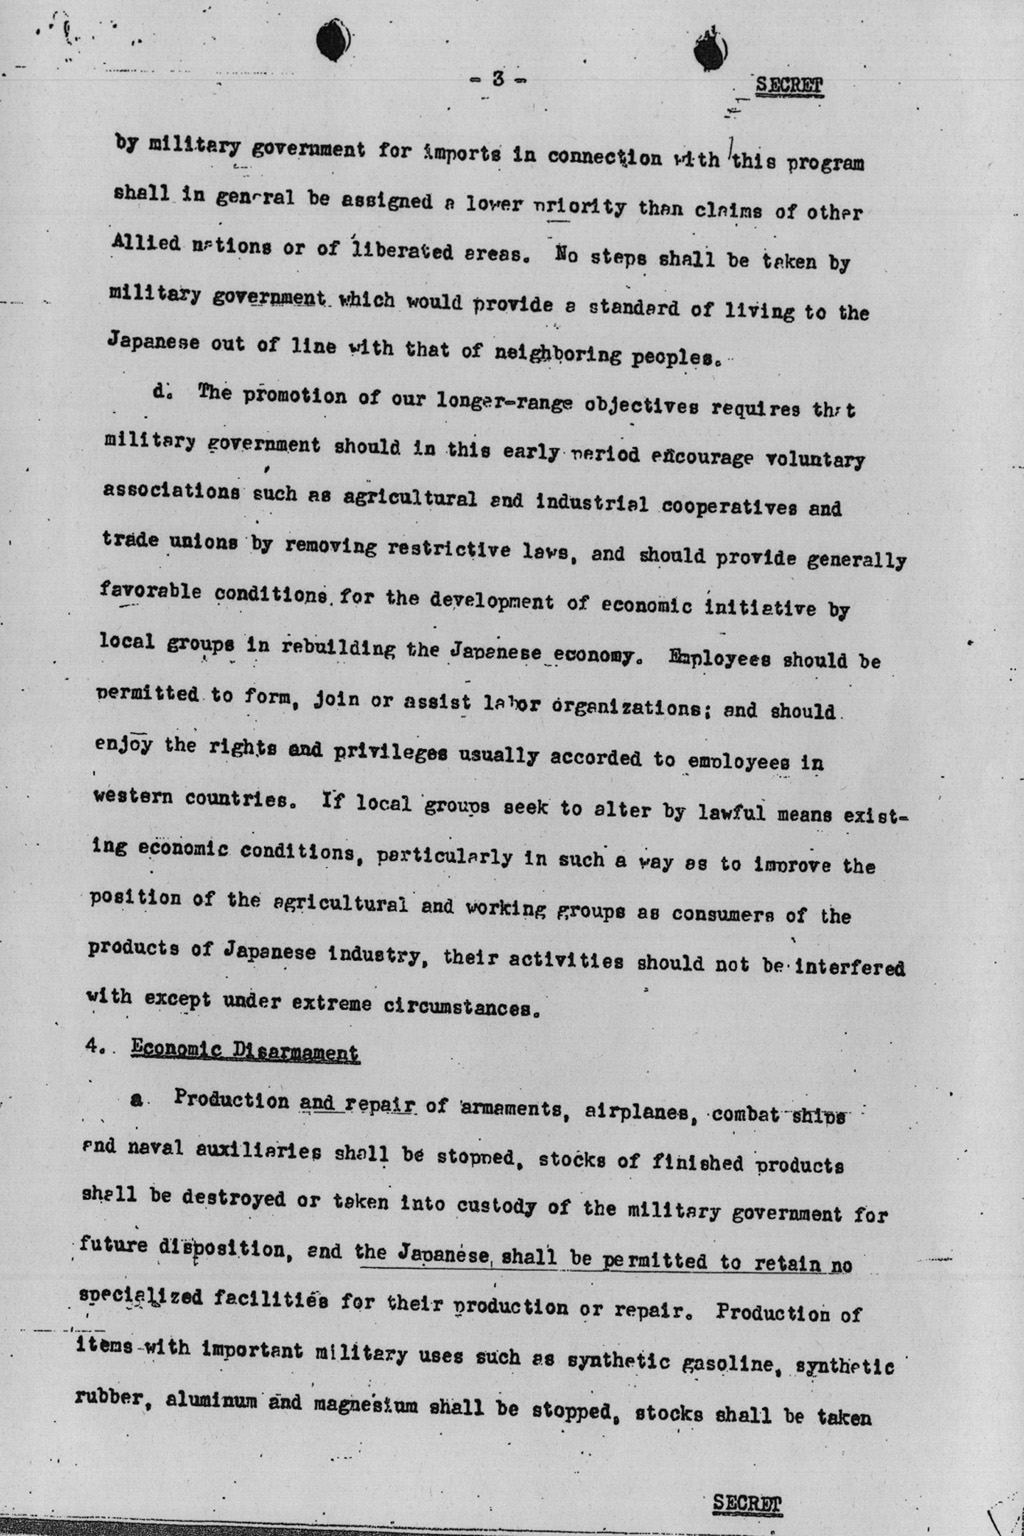 [Summary of United States Initial Post-Defeat Policy relating to Japan (Informal and without Commitment by the Department of State)](Larger image)